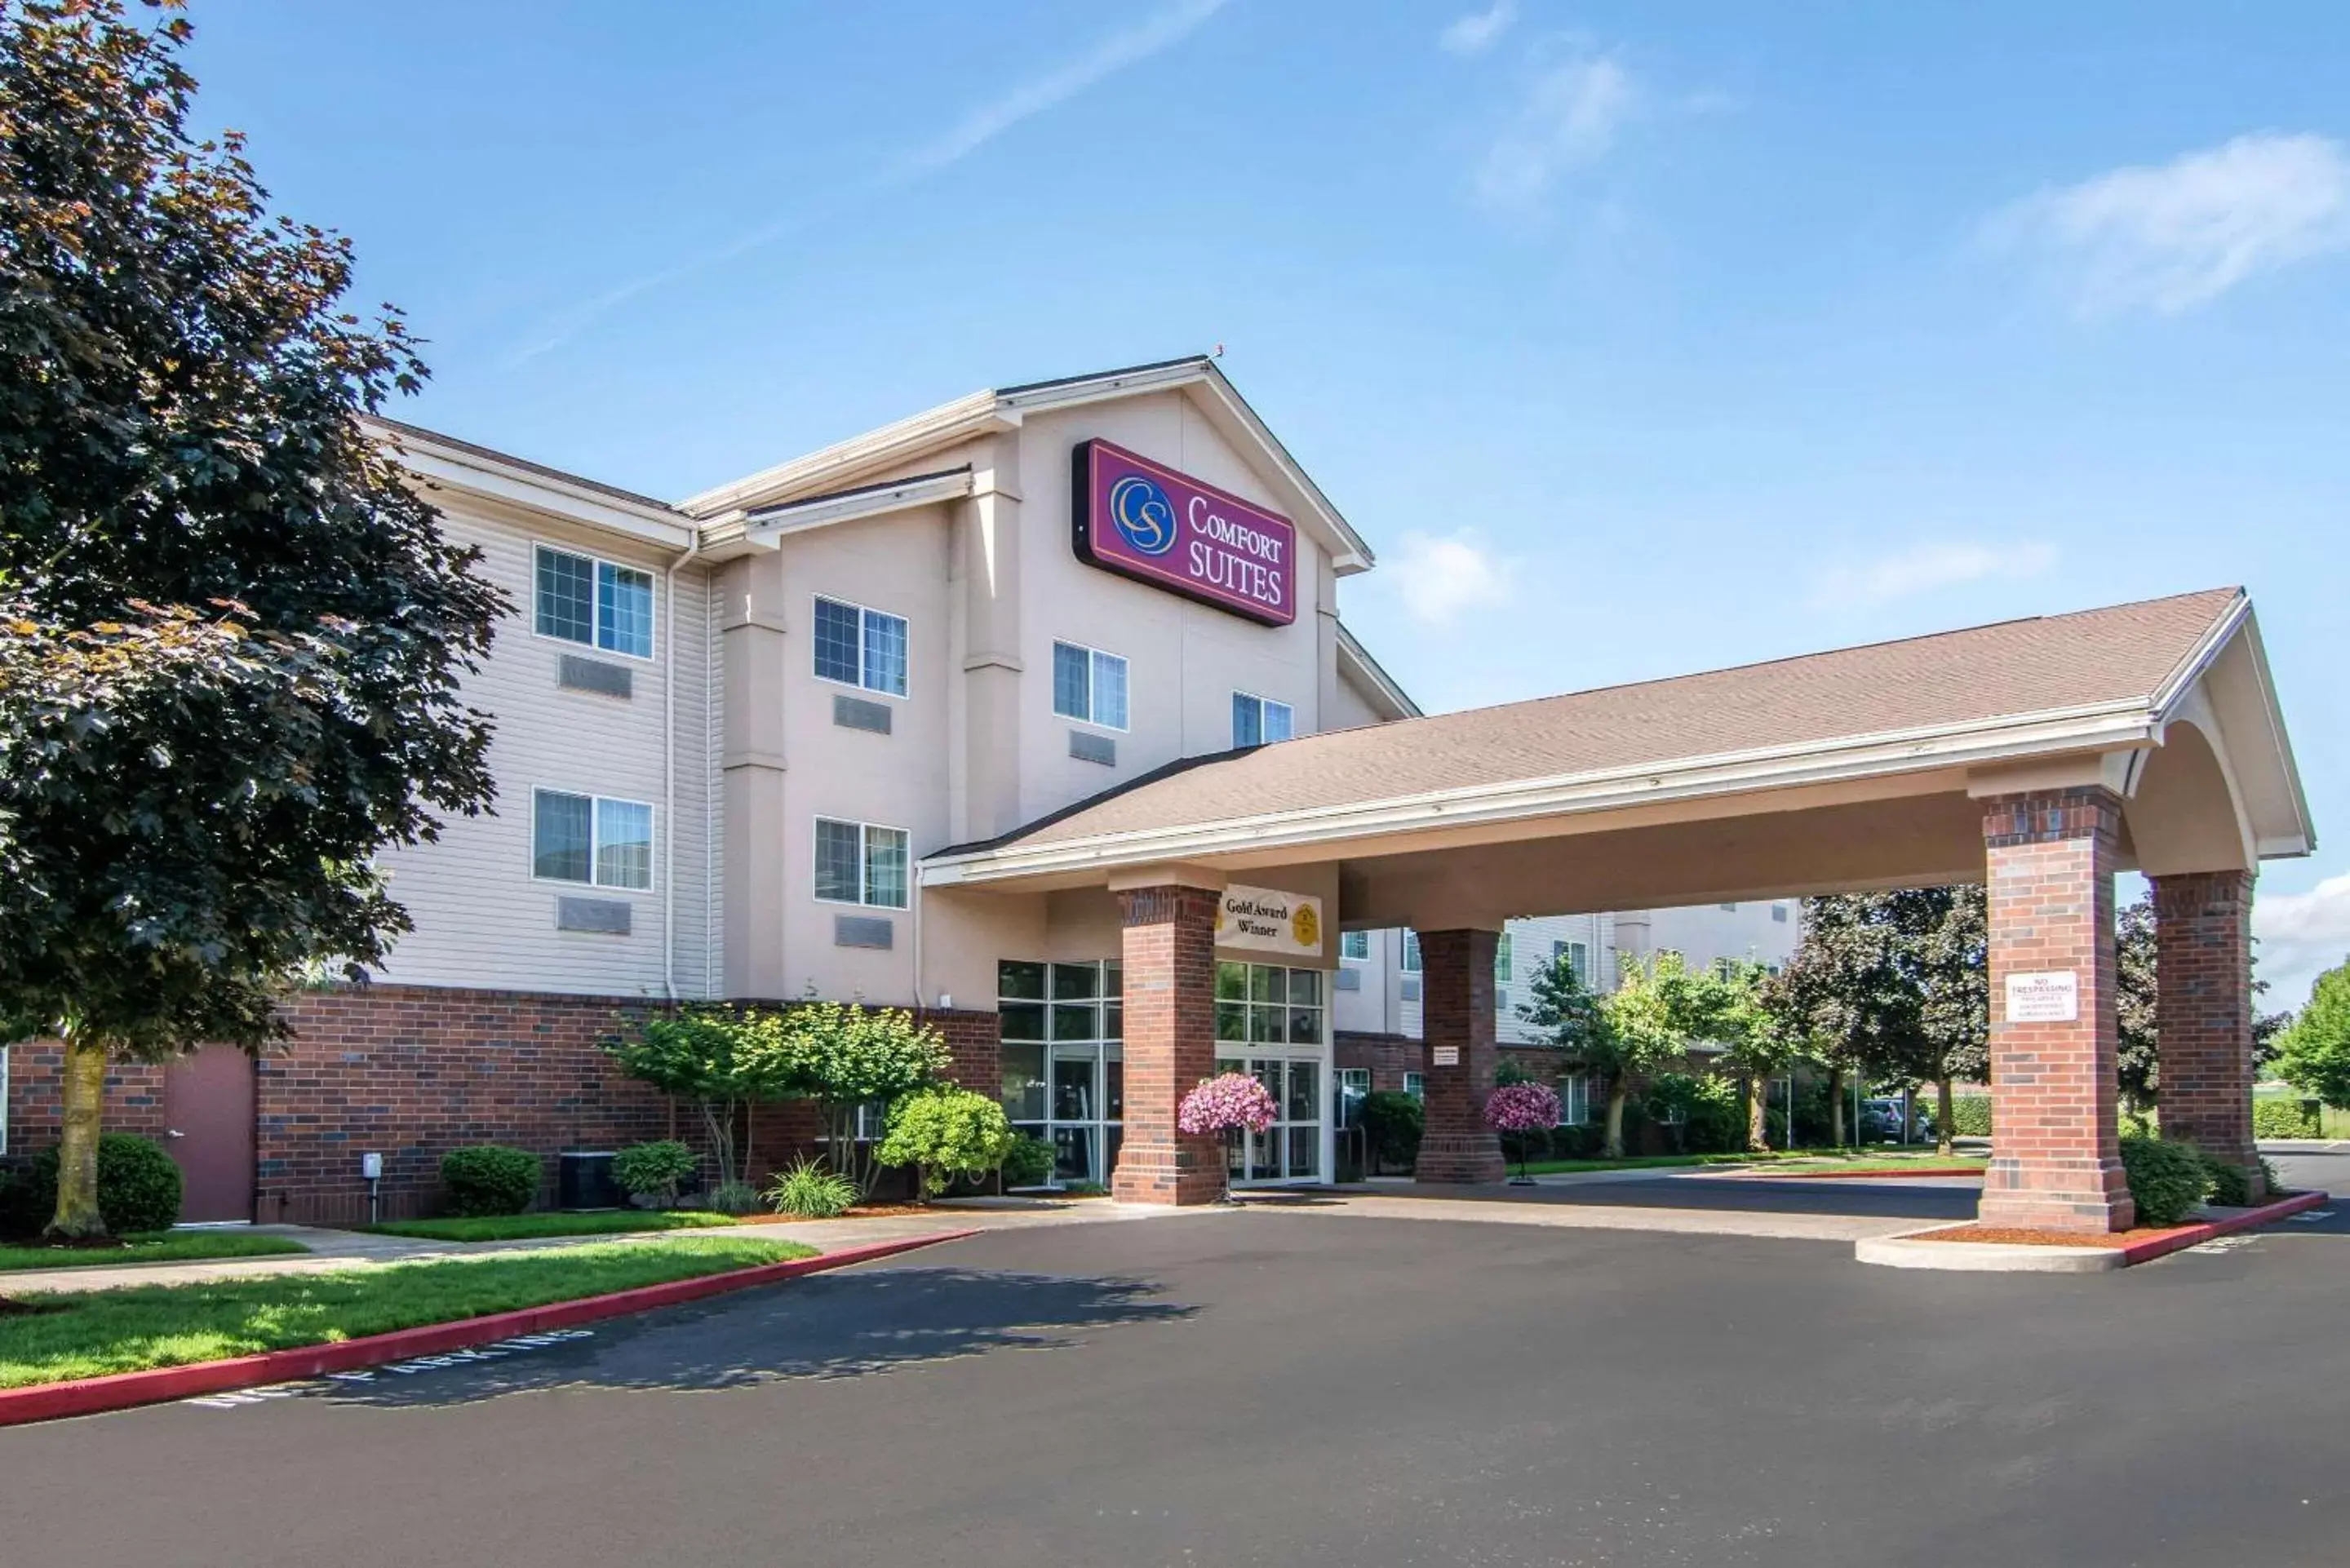 Property building in Comfort Suites Linn County Fairground and Expo